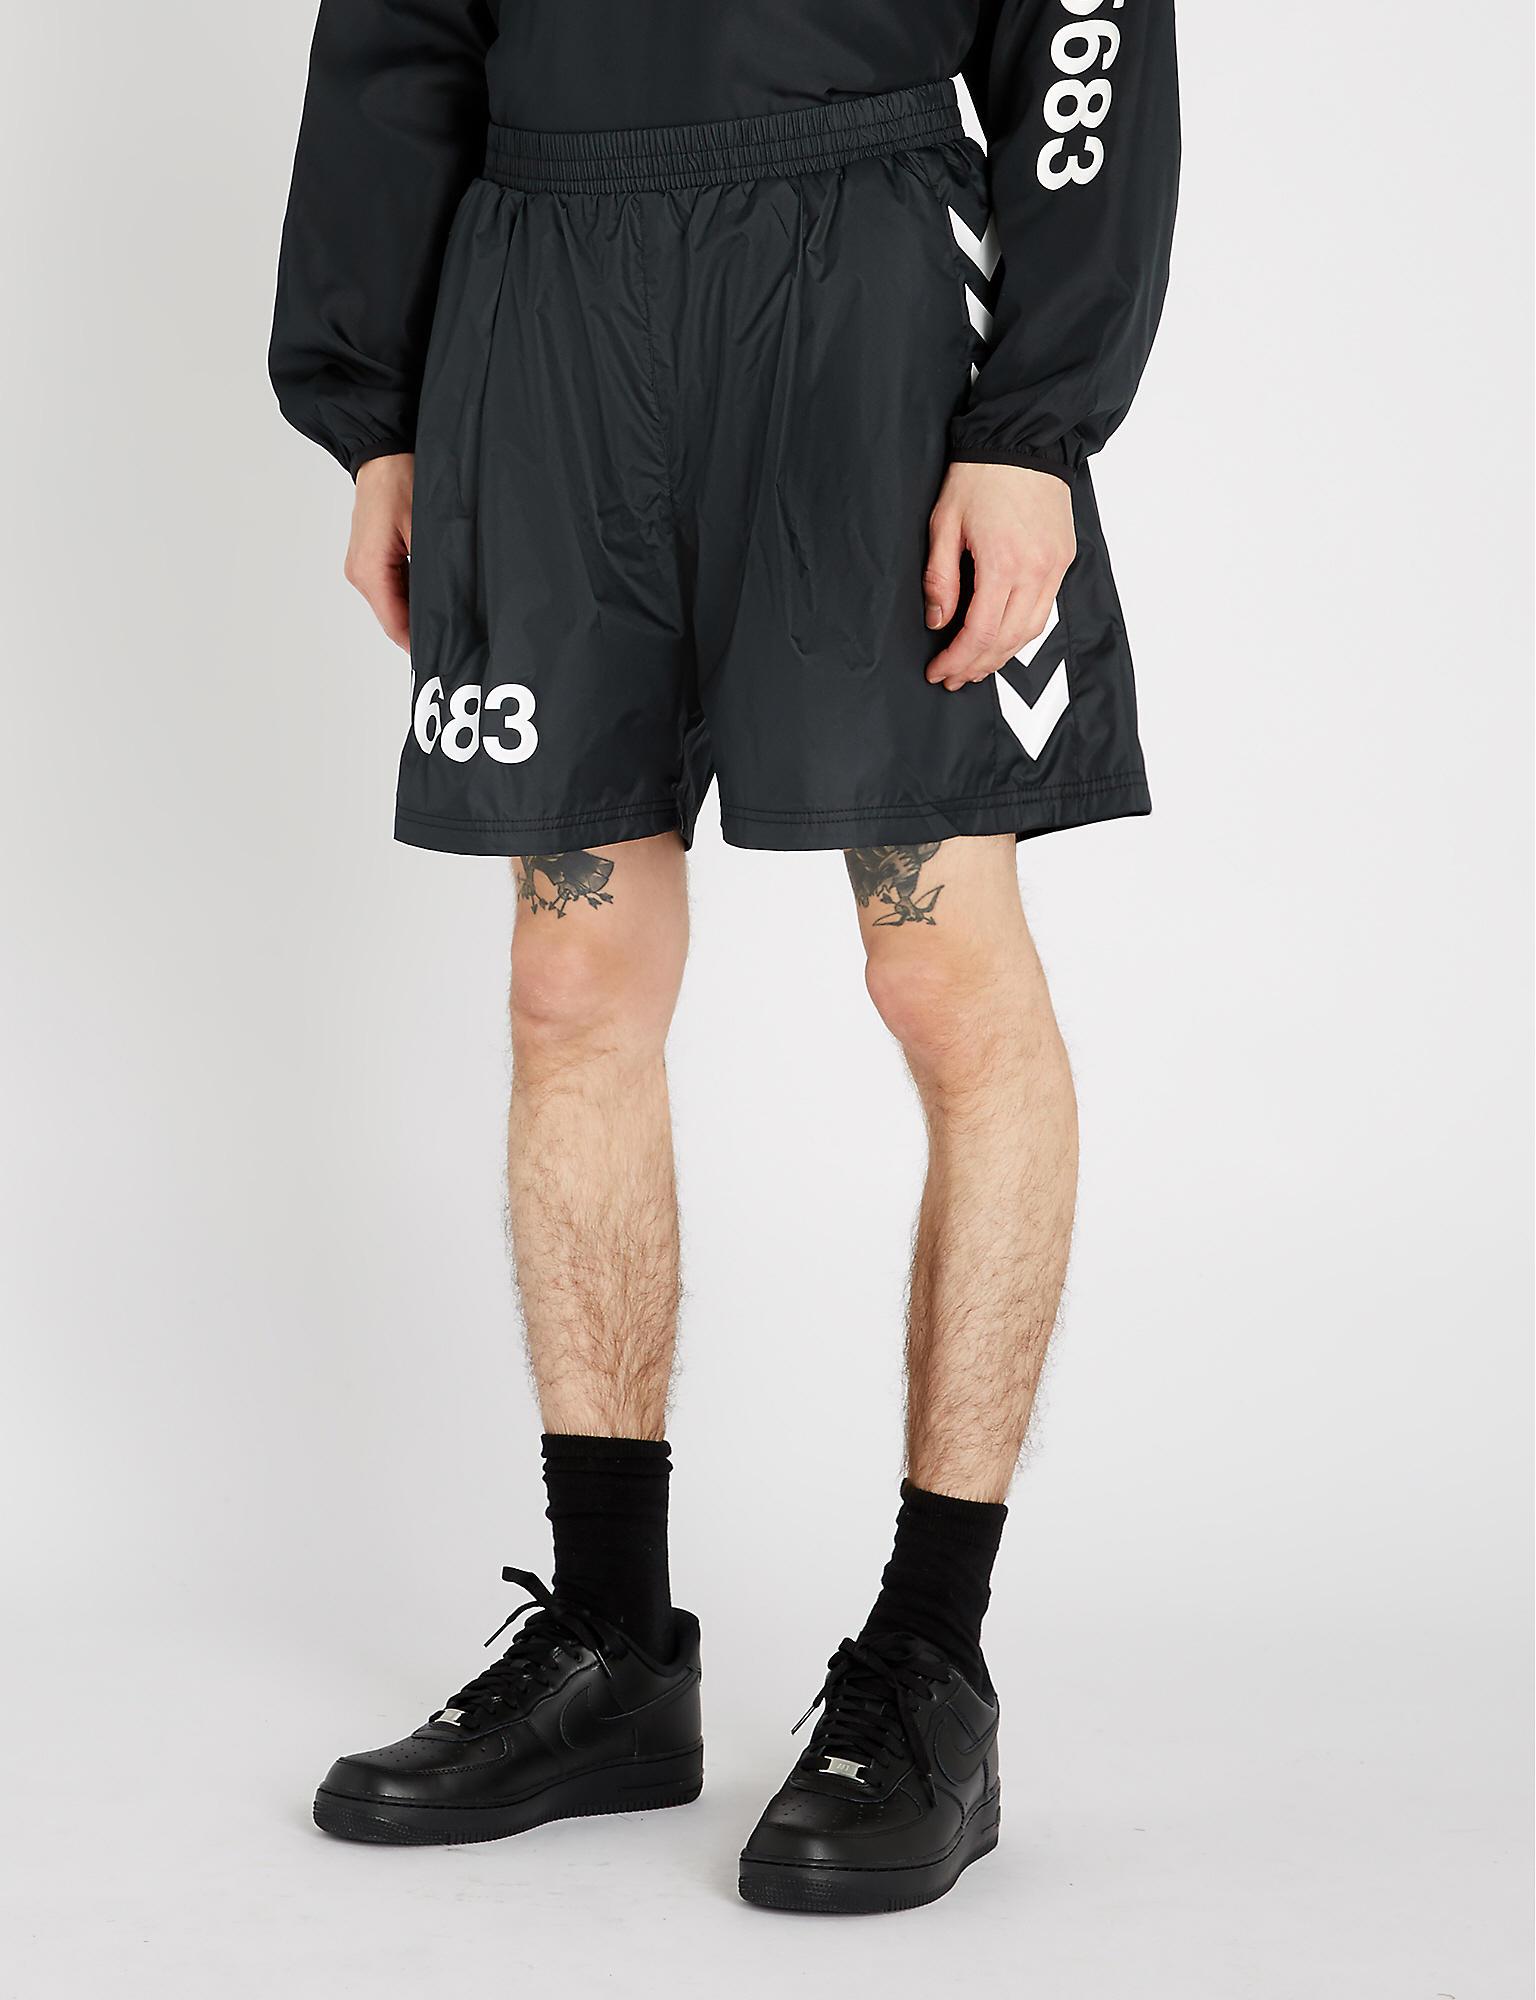 Hummel X Willy Chavarria Relaxed-fit Shell Shorts in Black for Men - Lyst